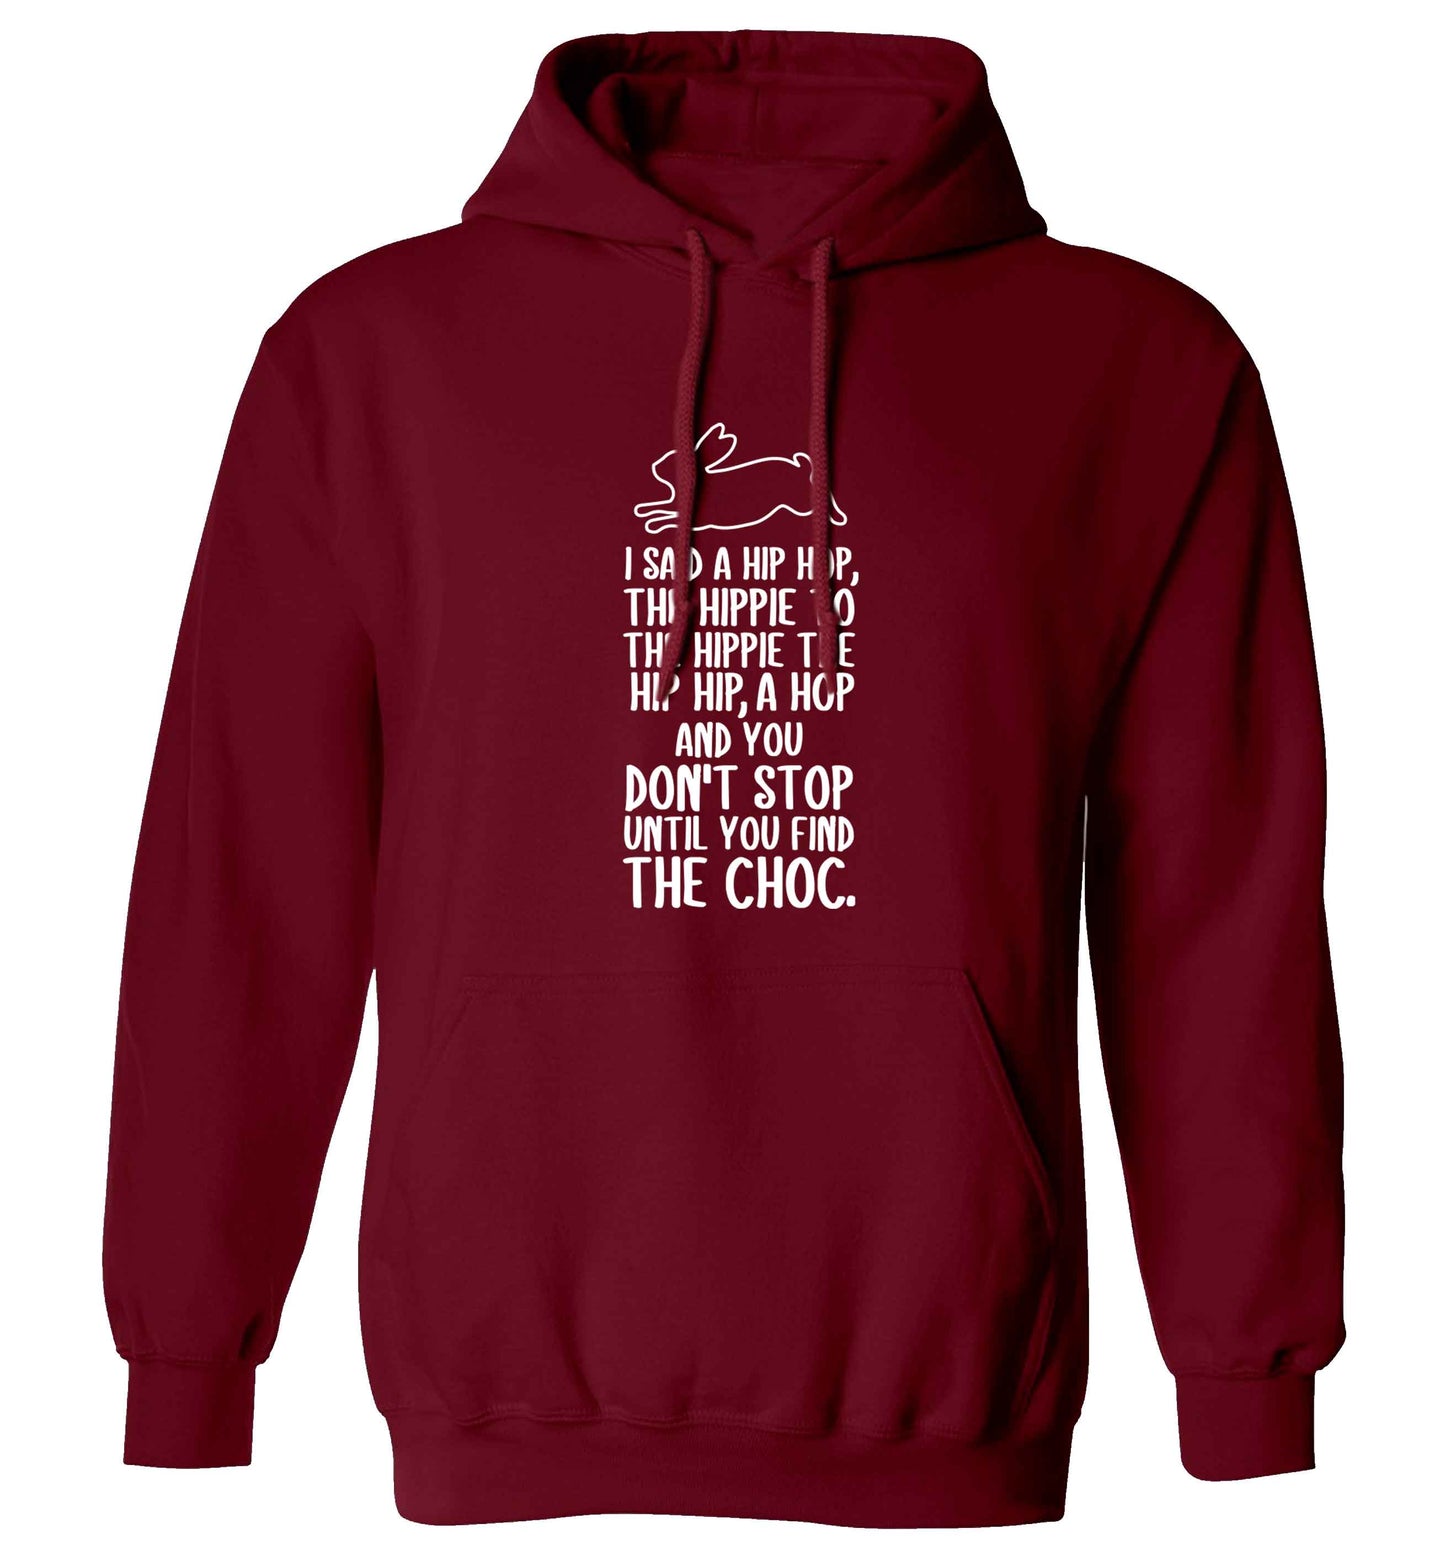 Don't stop until you find the choc adults unisex maroon hoodie 2XL